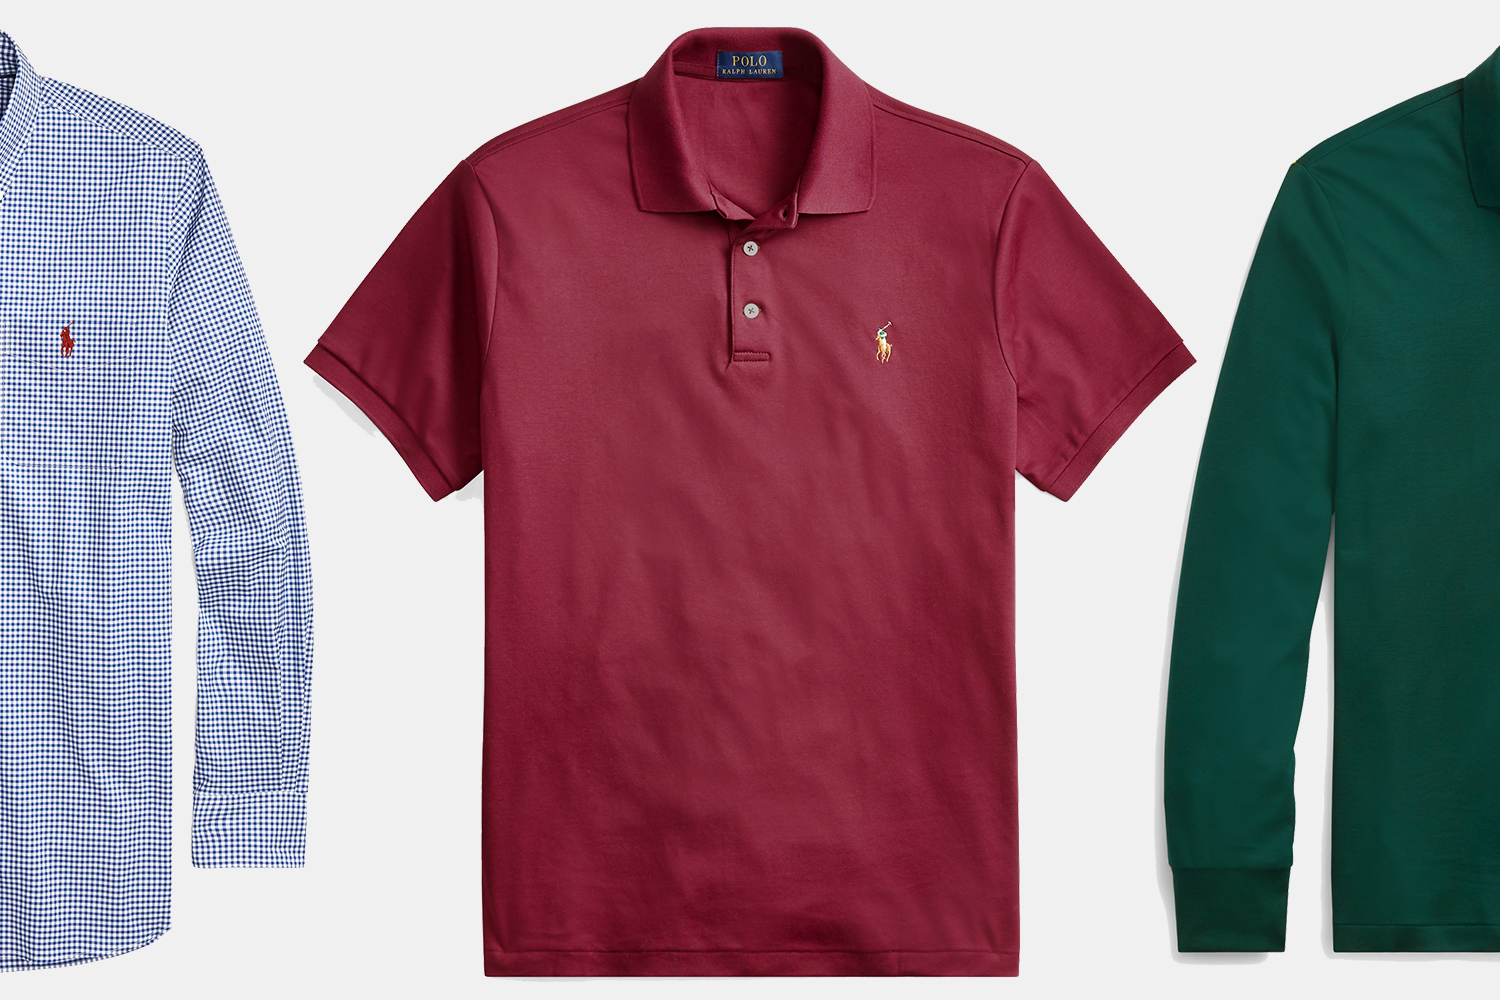 Ralph Lauren Men's Polos Are as Low as 